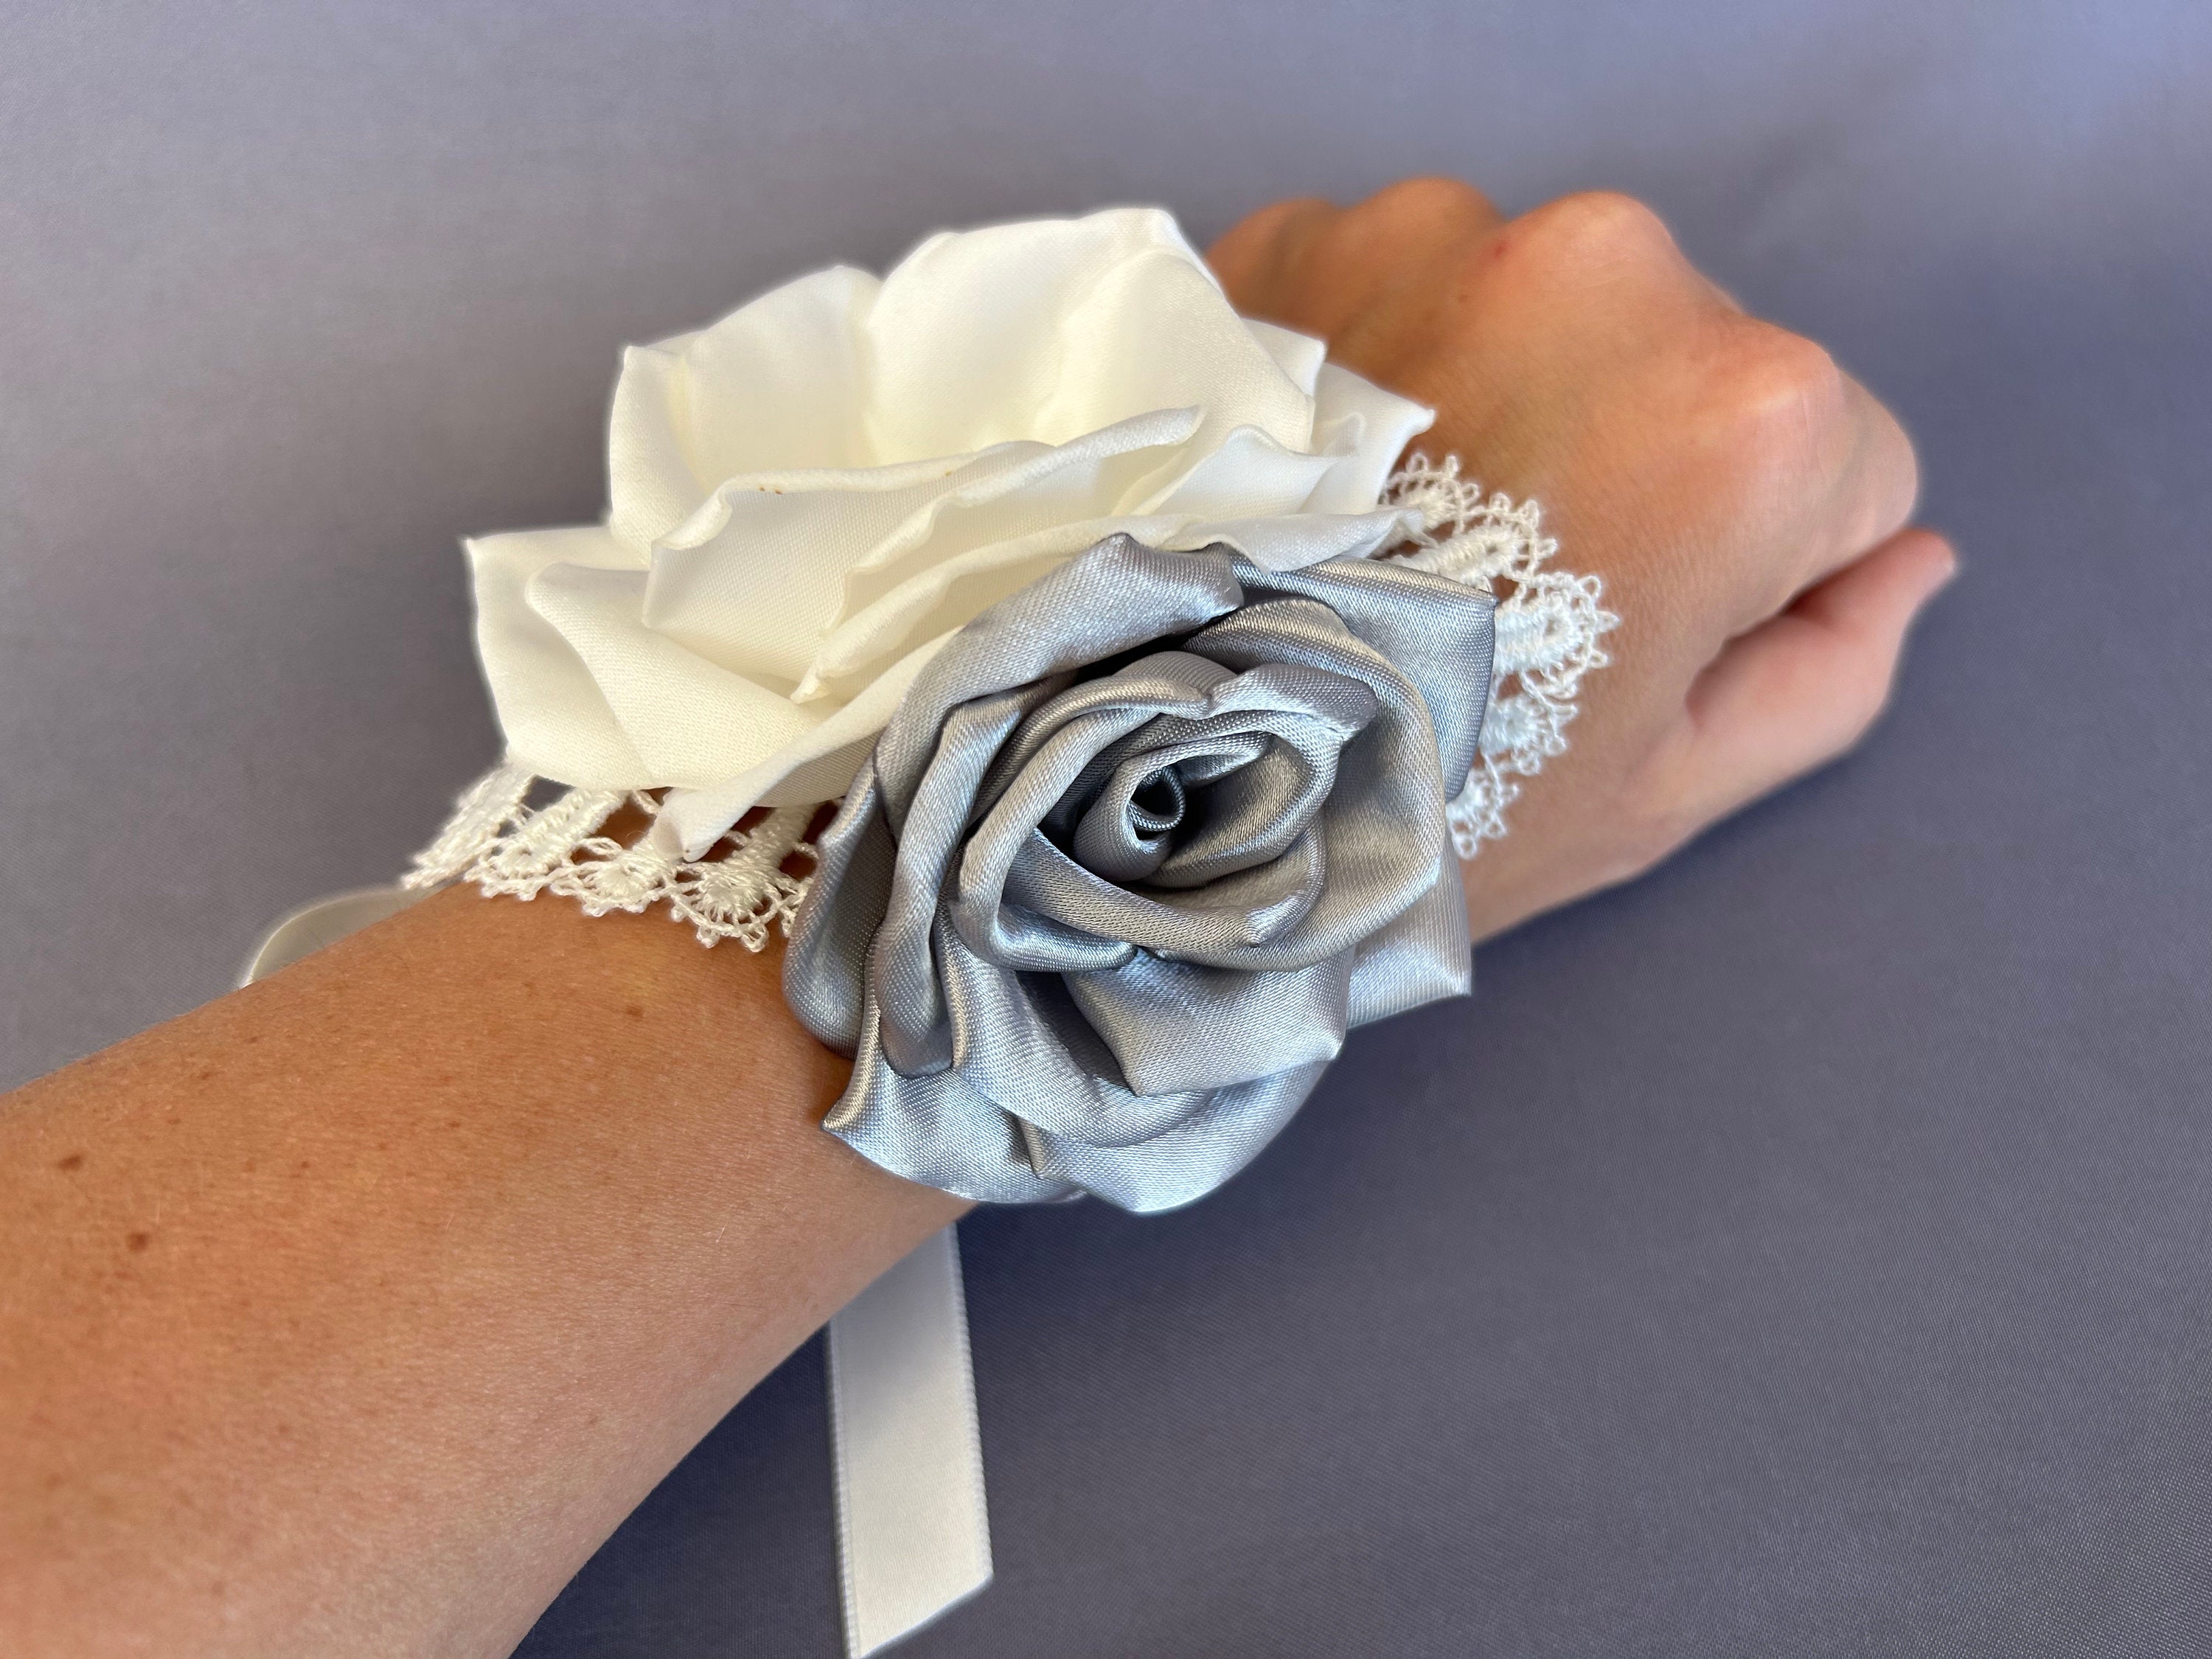 Rose Wrist Flower Brats Corsage Wristband Hand Flowers Bracelets Band For  Wedding Bridesmaid Bridal Shower Prom Party - Artificial Flowers -  AliExpress